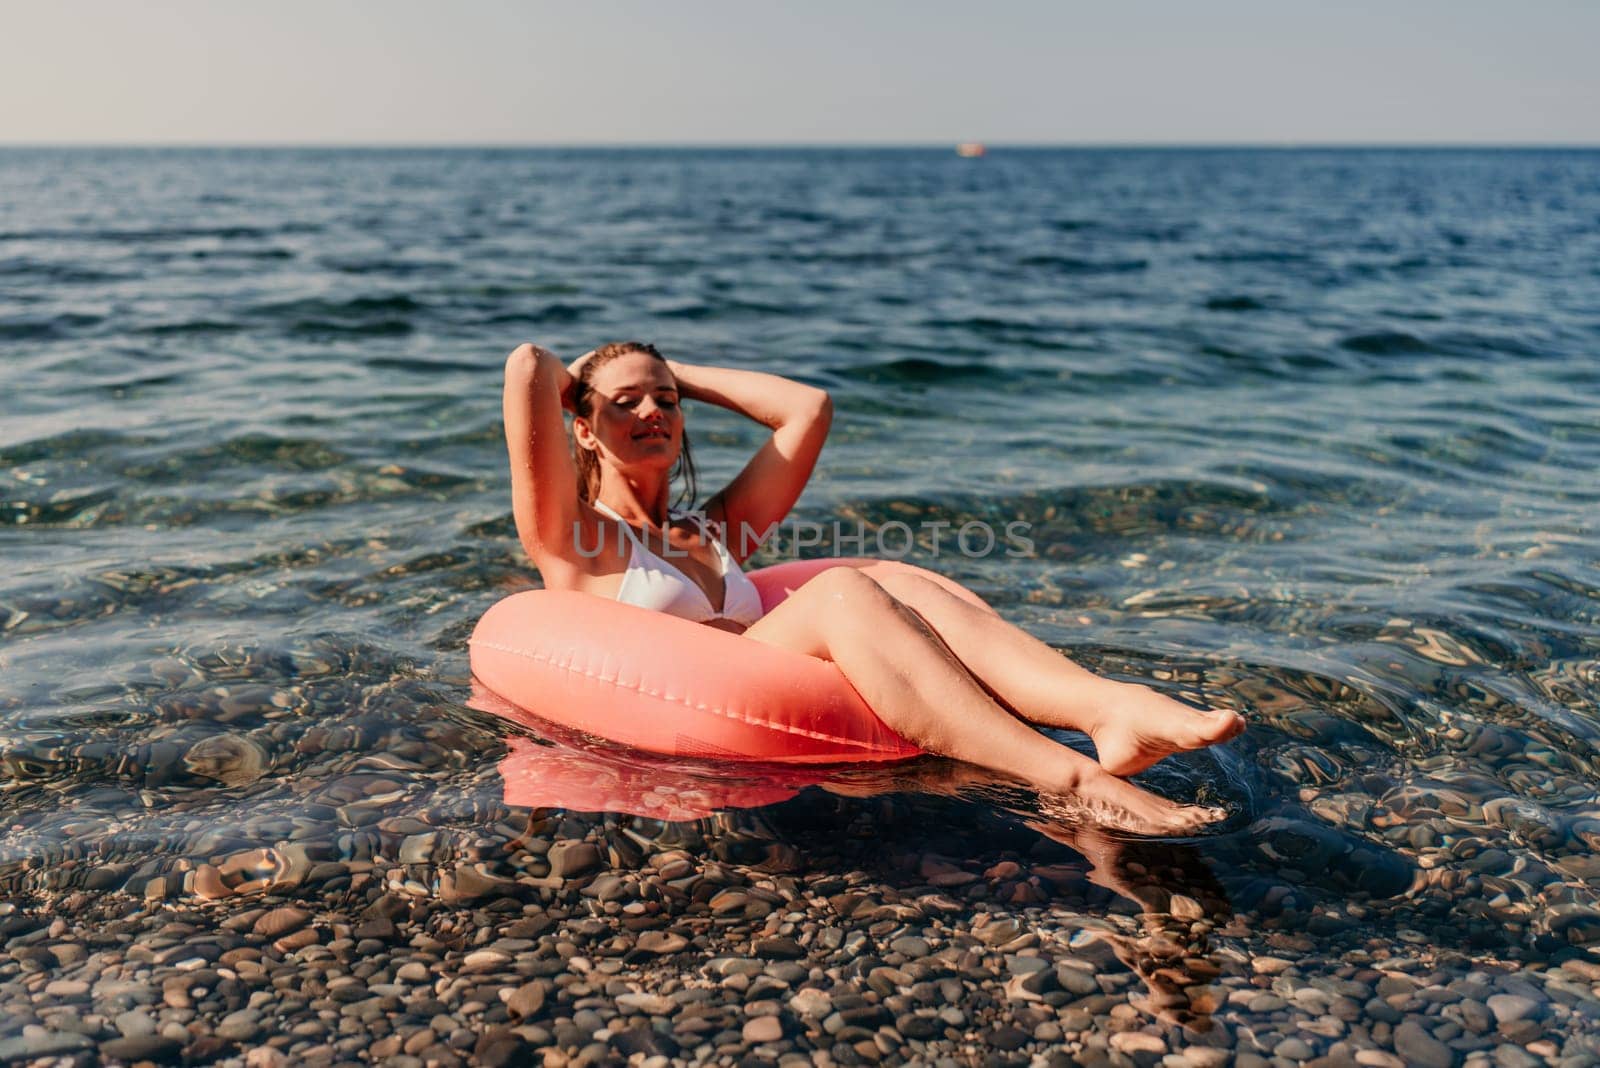 A woman is floating on a red inflatable tube in the ocean. She is smiling and enjoying the water